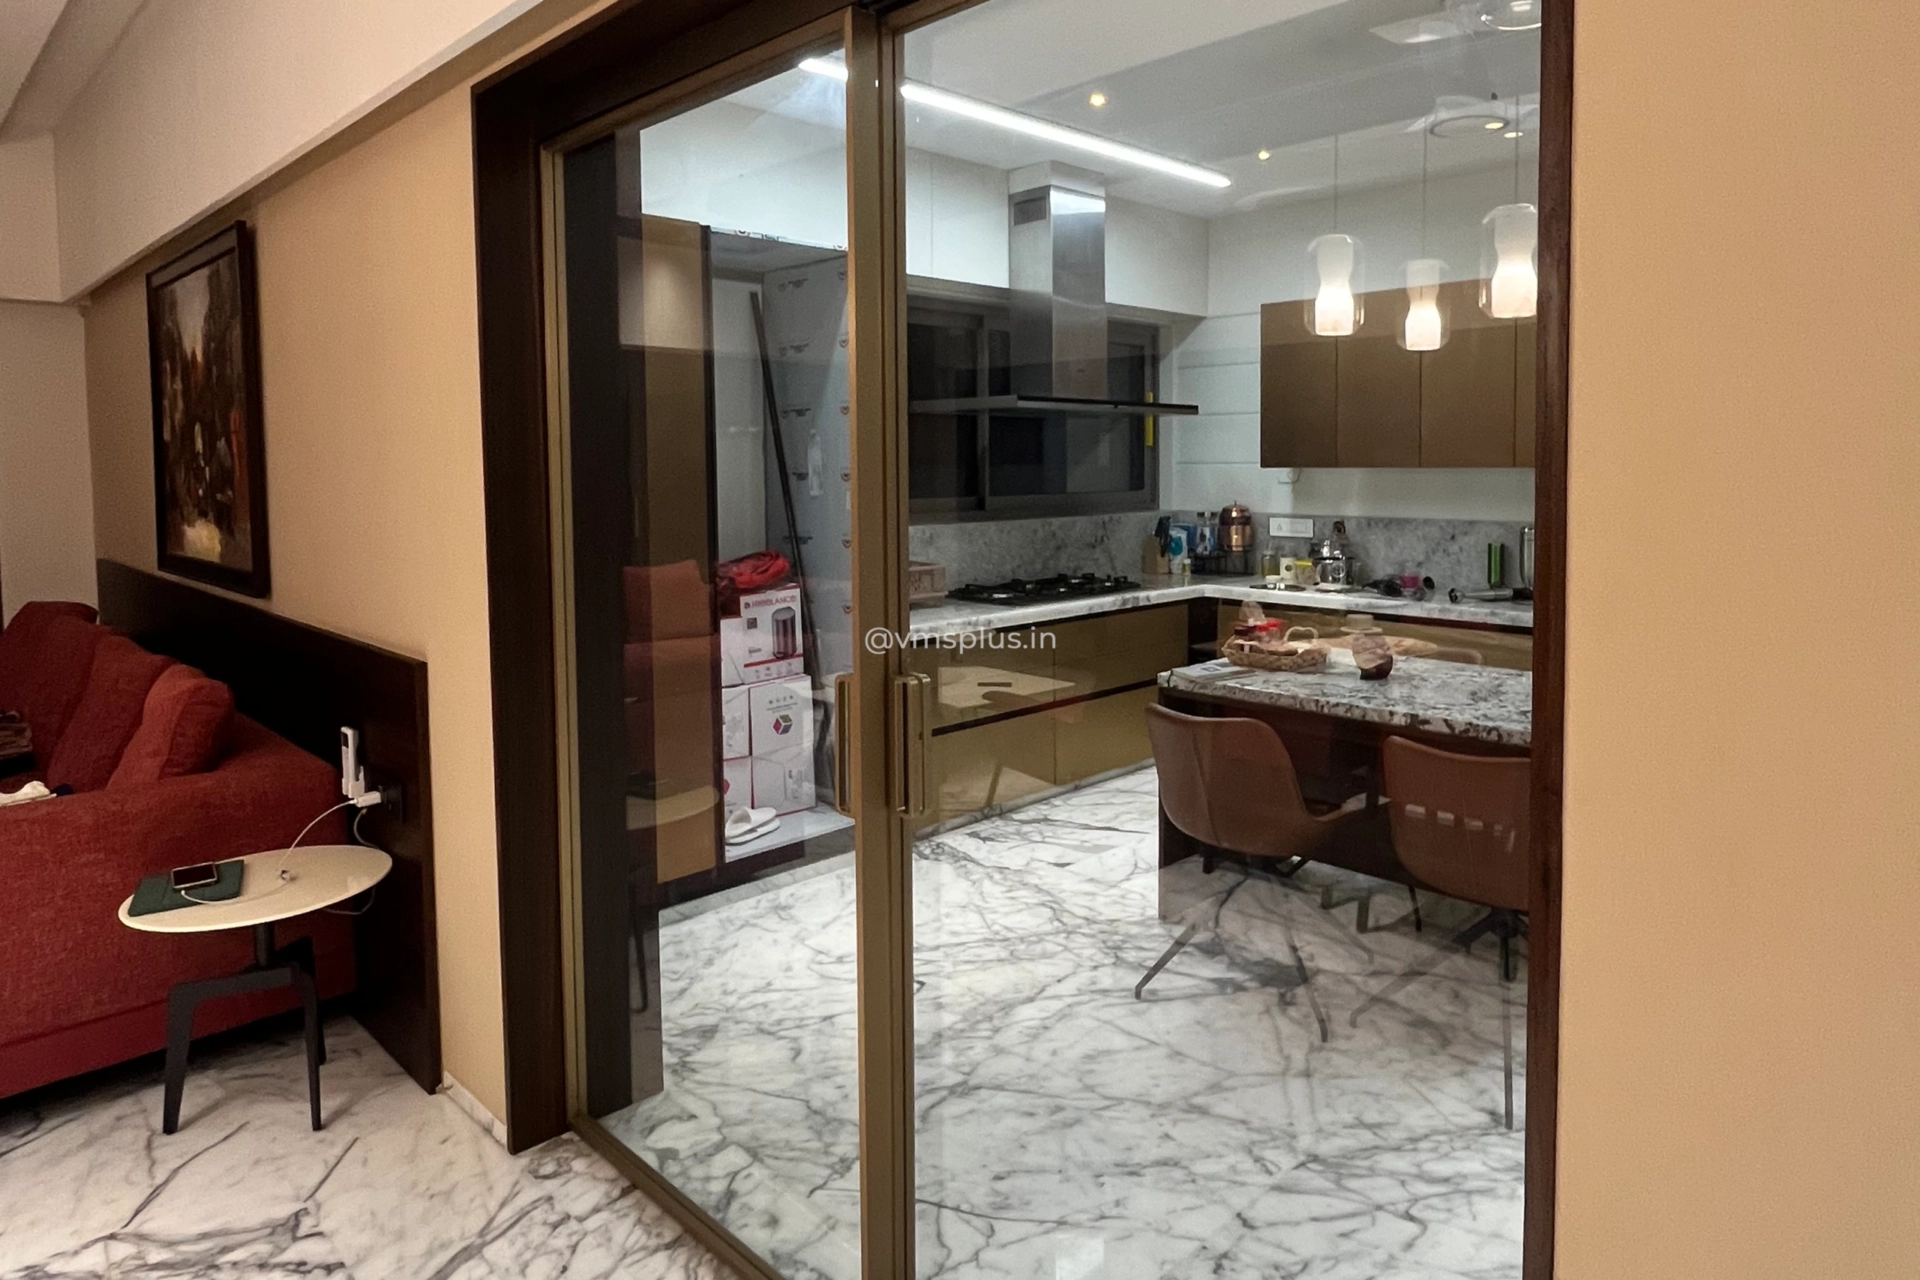 Benefits of Using Glass Partitions in Your Home